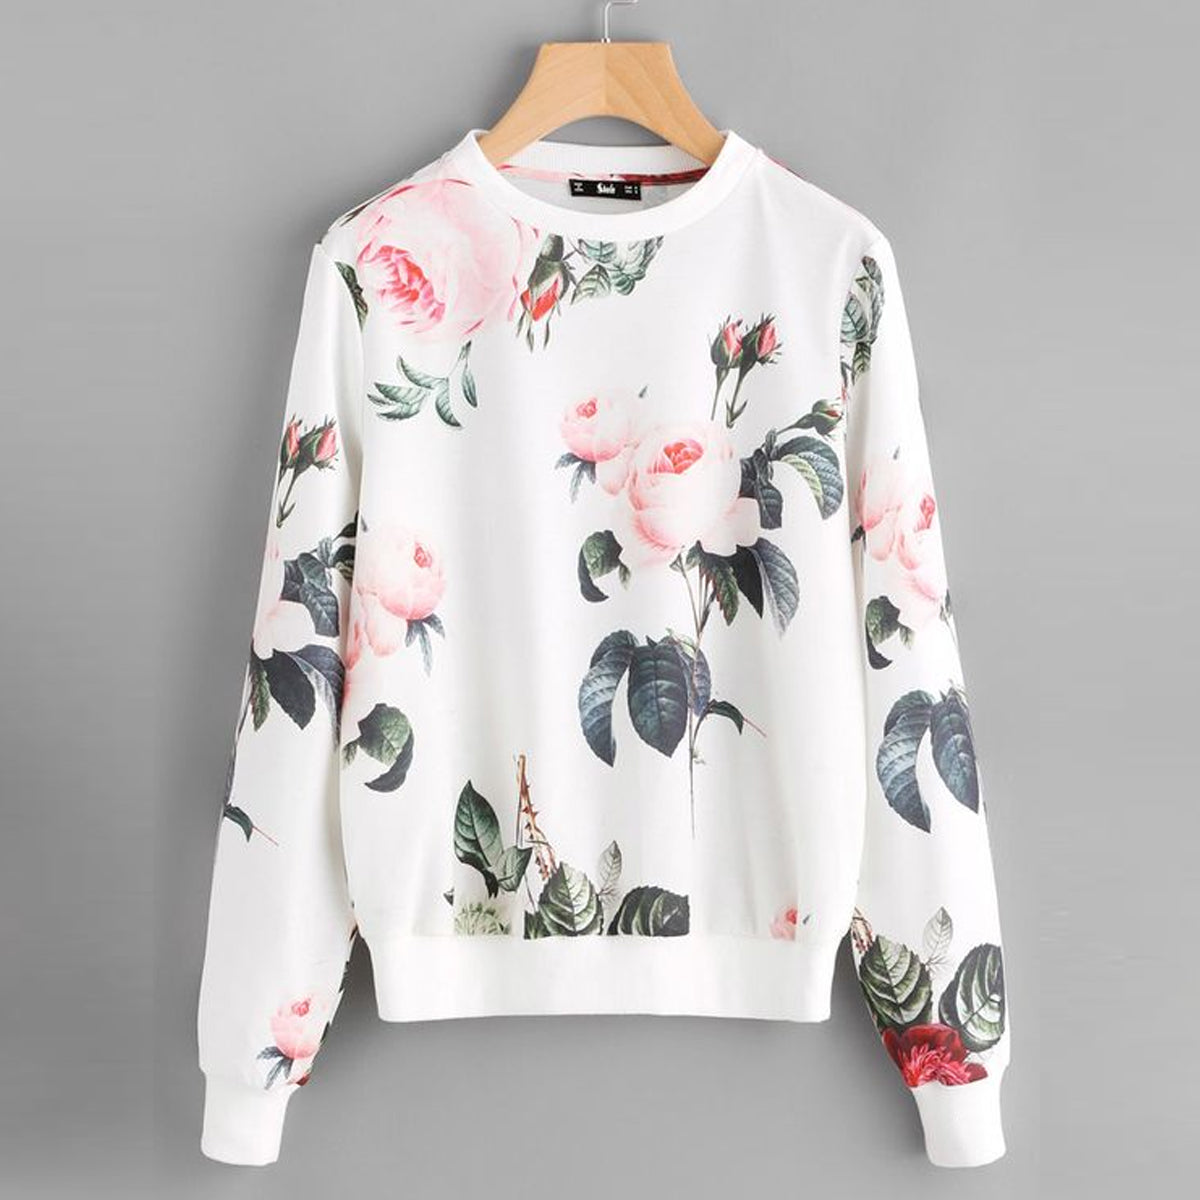 Stylish Floral Full Sleeves T-Shirt